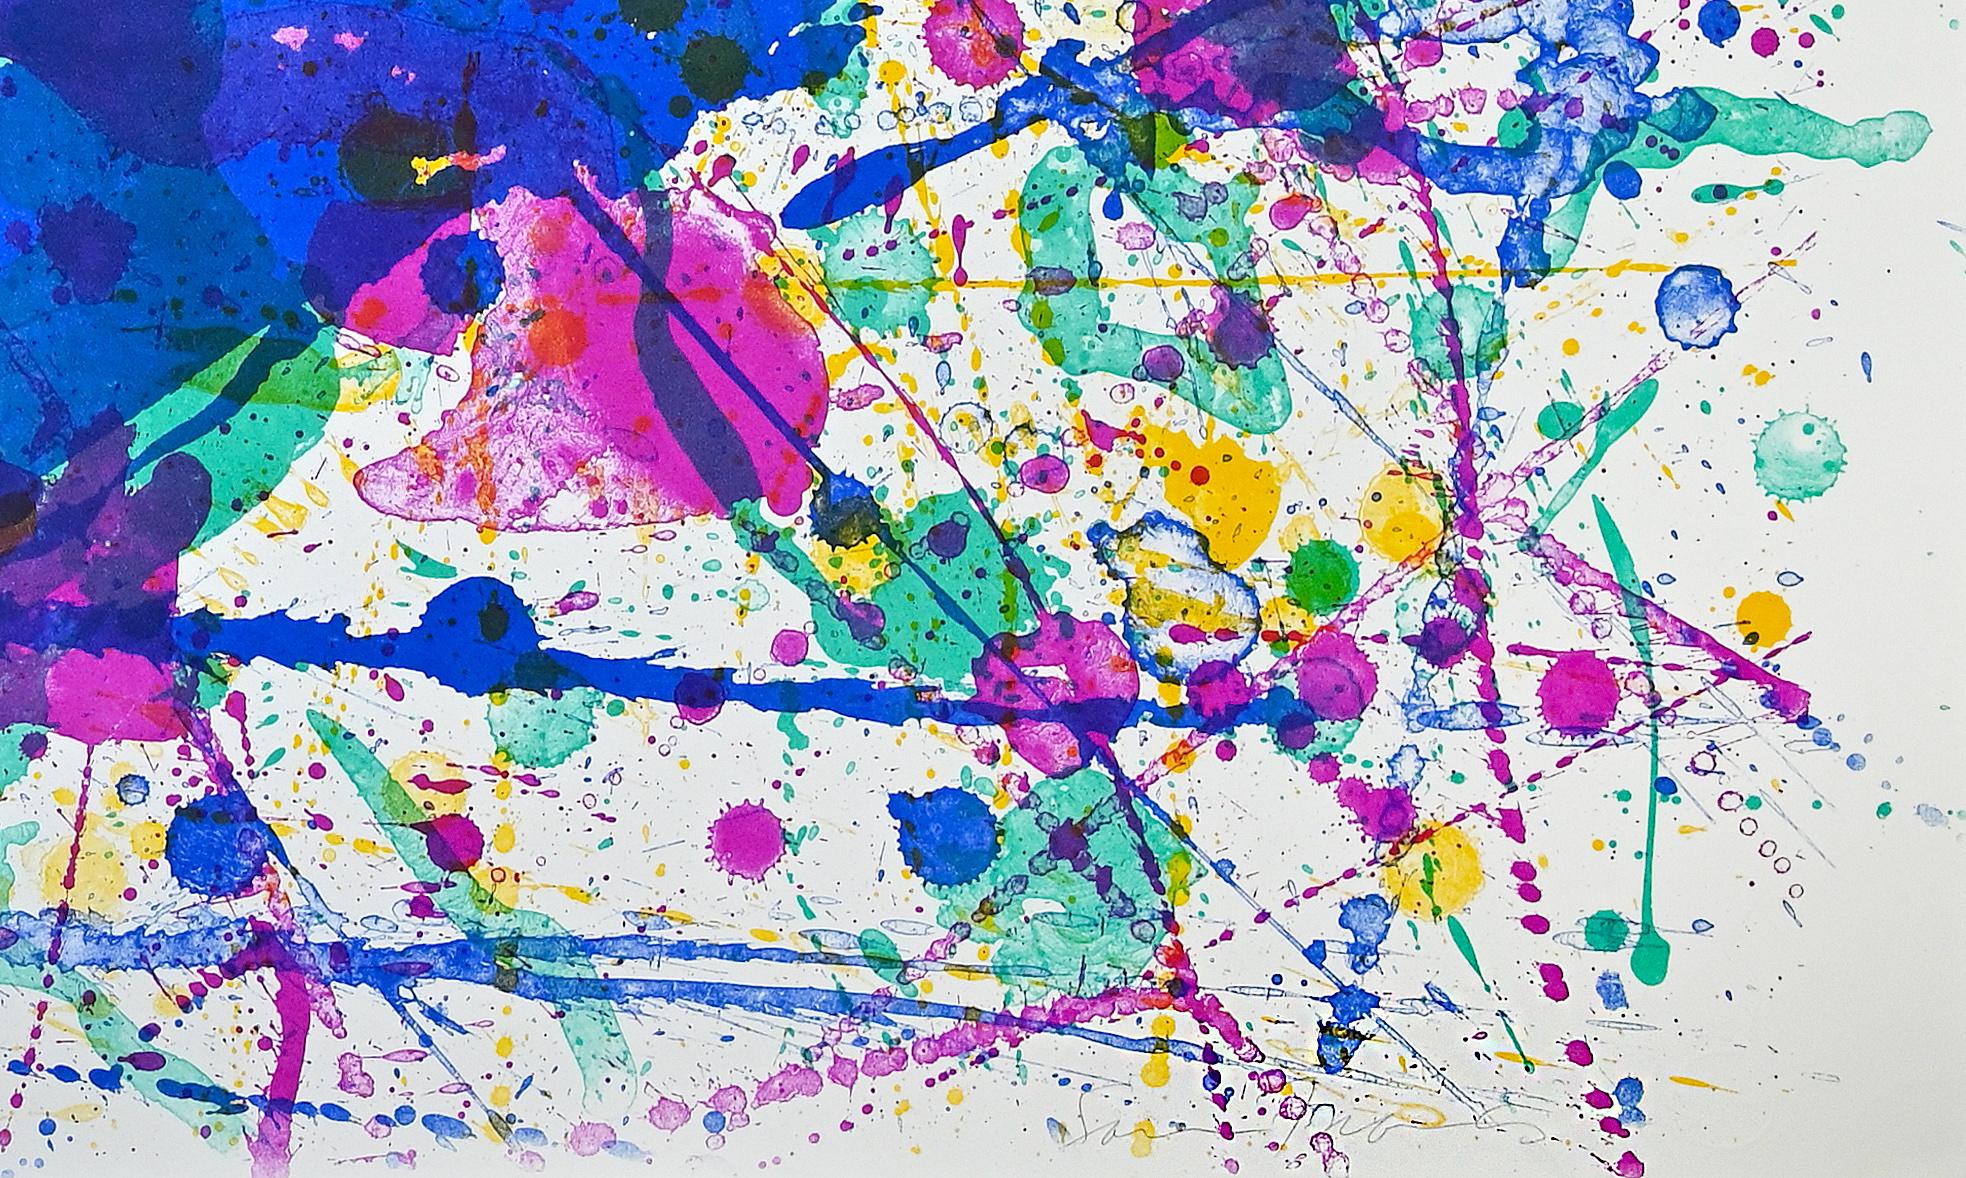 Untitled is an artwork realized in 1980 by Sam Francis.

Mixed colored lithograph on BFK Rives.

Hand signed on lower margin. Artist's proof.

Litho Shop, Publisher and Printer, Santa Monica.

Excellent condition except for a minor repair on one of